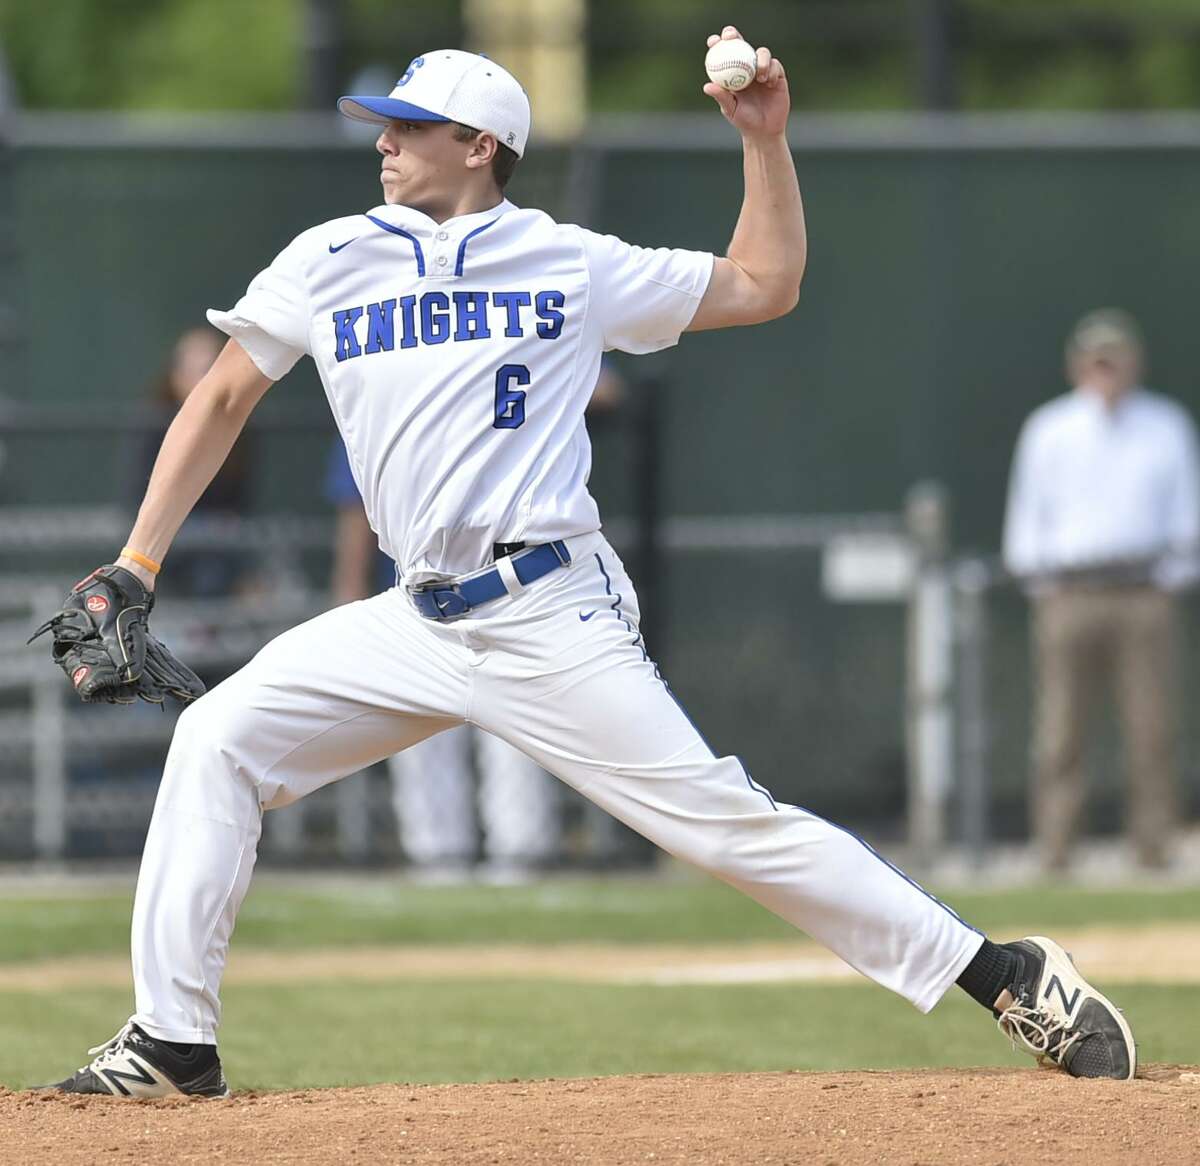 Waterbury, Connecticut - Tuesday, June 3, 2019: Amity H.S. vs. Southington H.S. during the CIAC Class LL 2019 State Baseball Tournament Semifinals Tuesday at the Municipal Stadium in Waterbury. Southington H.S. defeated Amity H.S. 3-2.